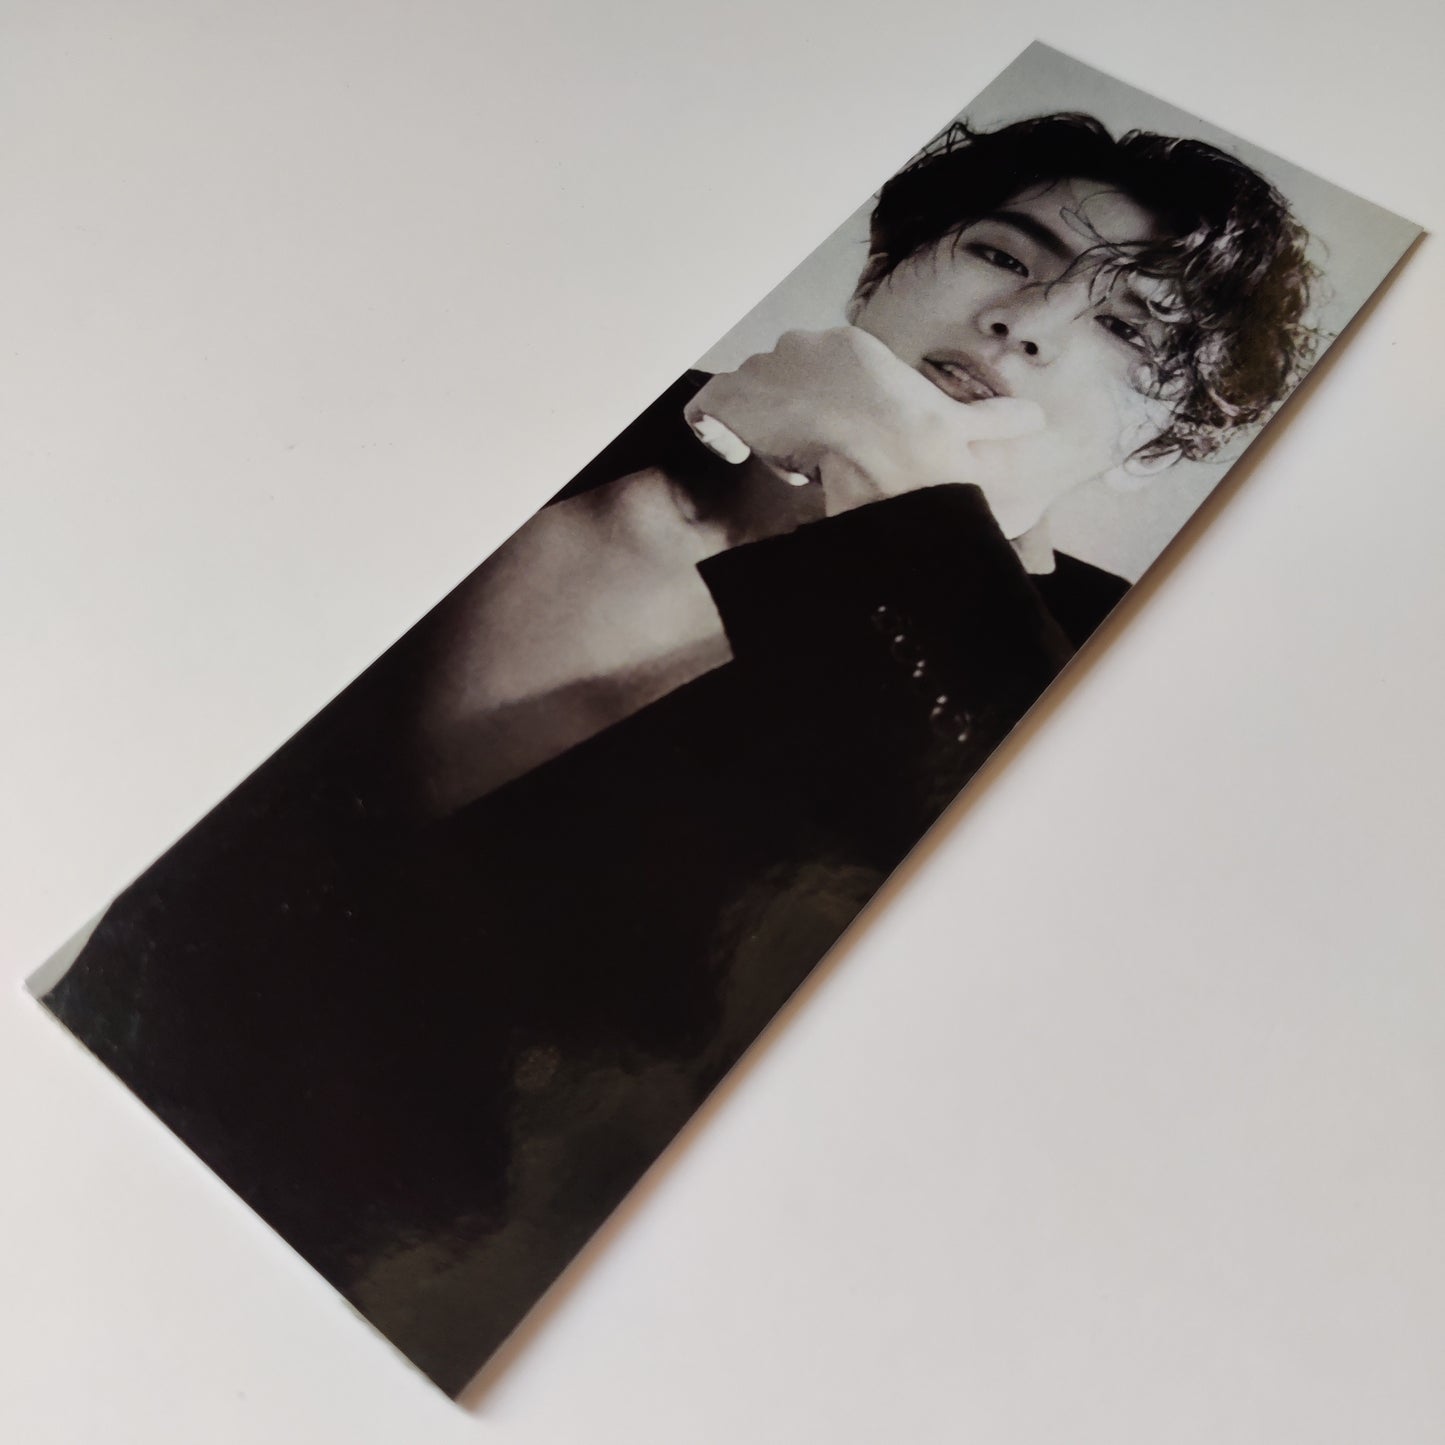 BTS Jin double sided bookmark